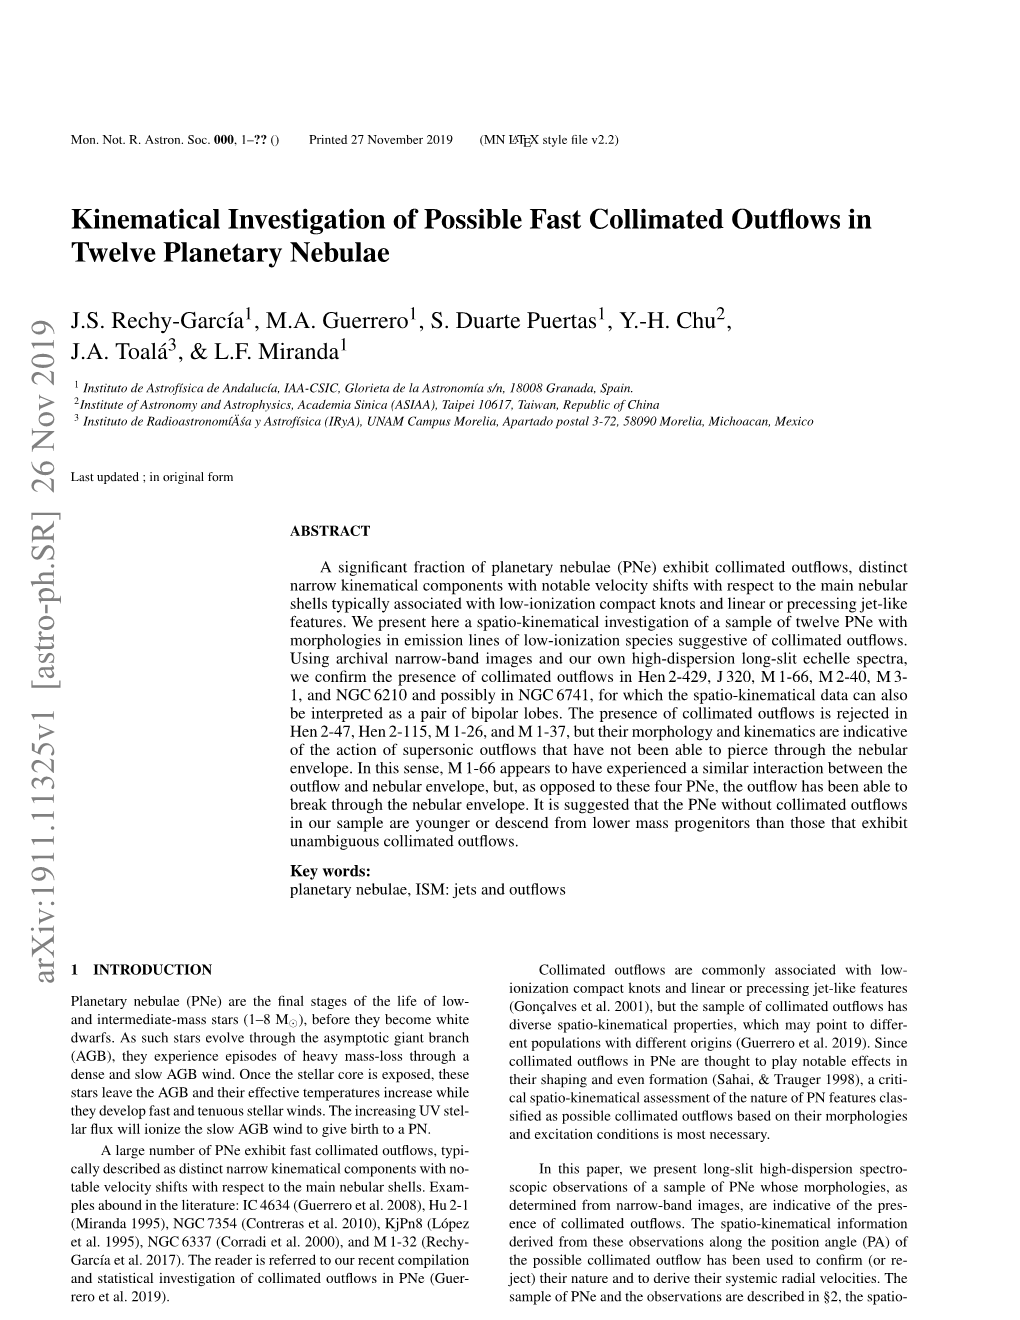 Kinematical Investigation of Possible Fast Collimated Outflows in Twelve